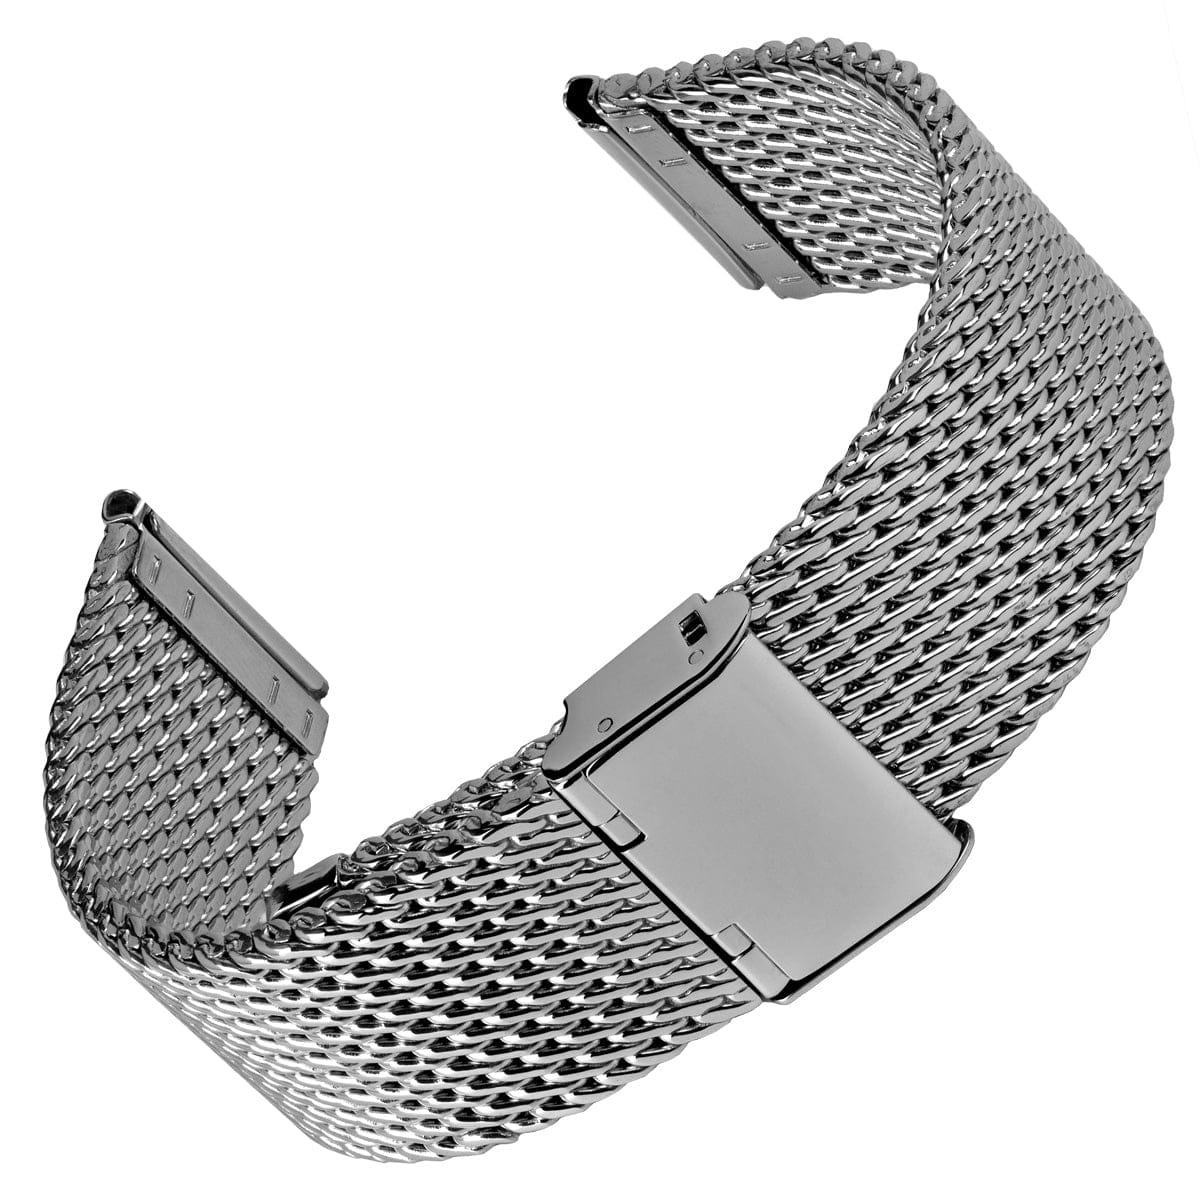 Geckota "Oblique" Milanese Mesh Stainless Watch Strap - Polished